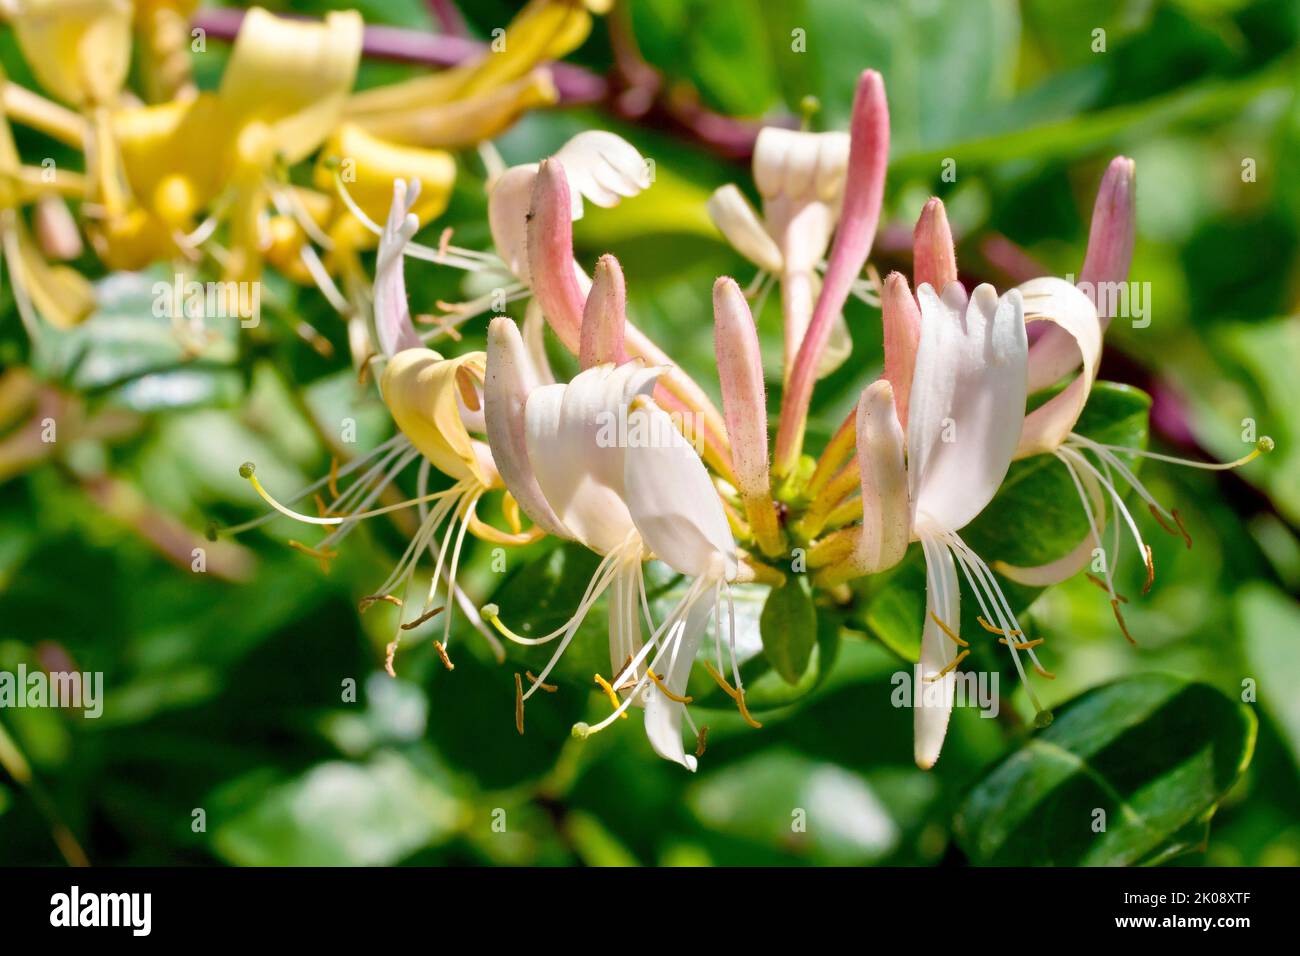 Honeysuckle (lonicera periclymenum), close up showing a single head of flowers and buds of the familiar hedgerow plant. Stock Photo